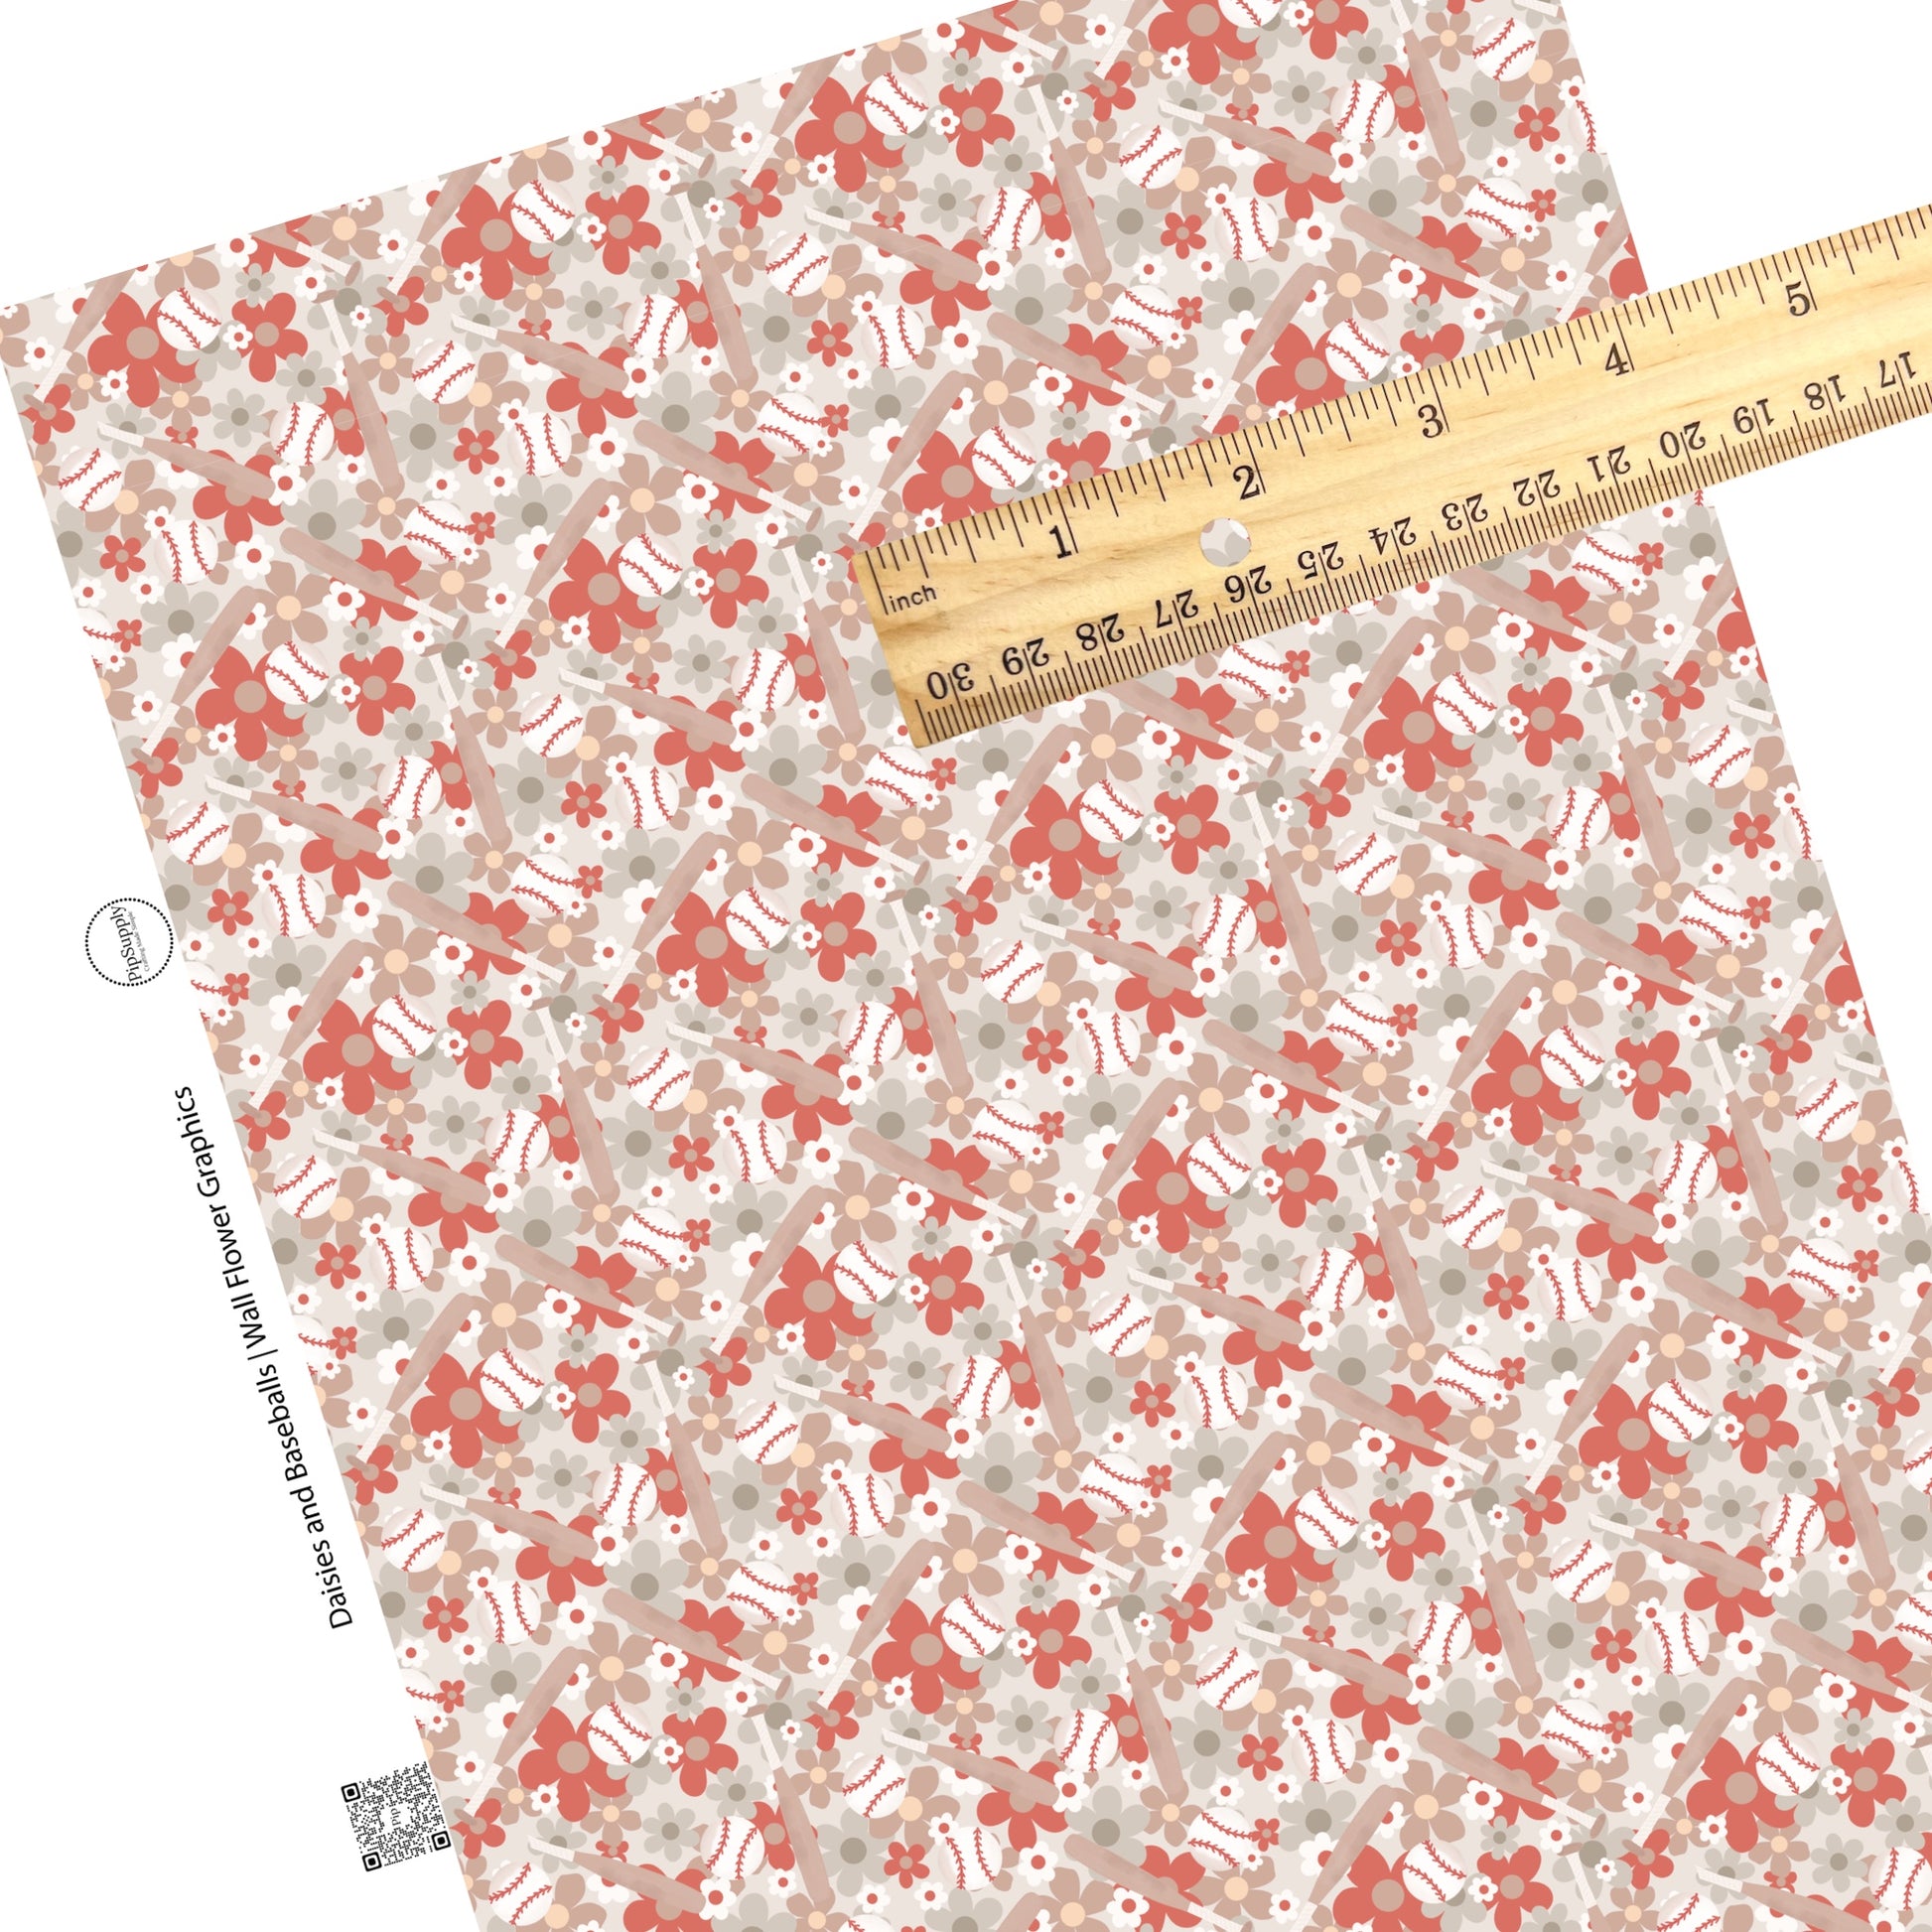 Floral baseballs and bats on gray faux leather sheets